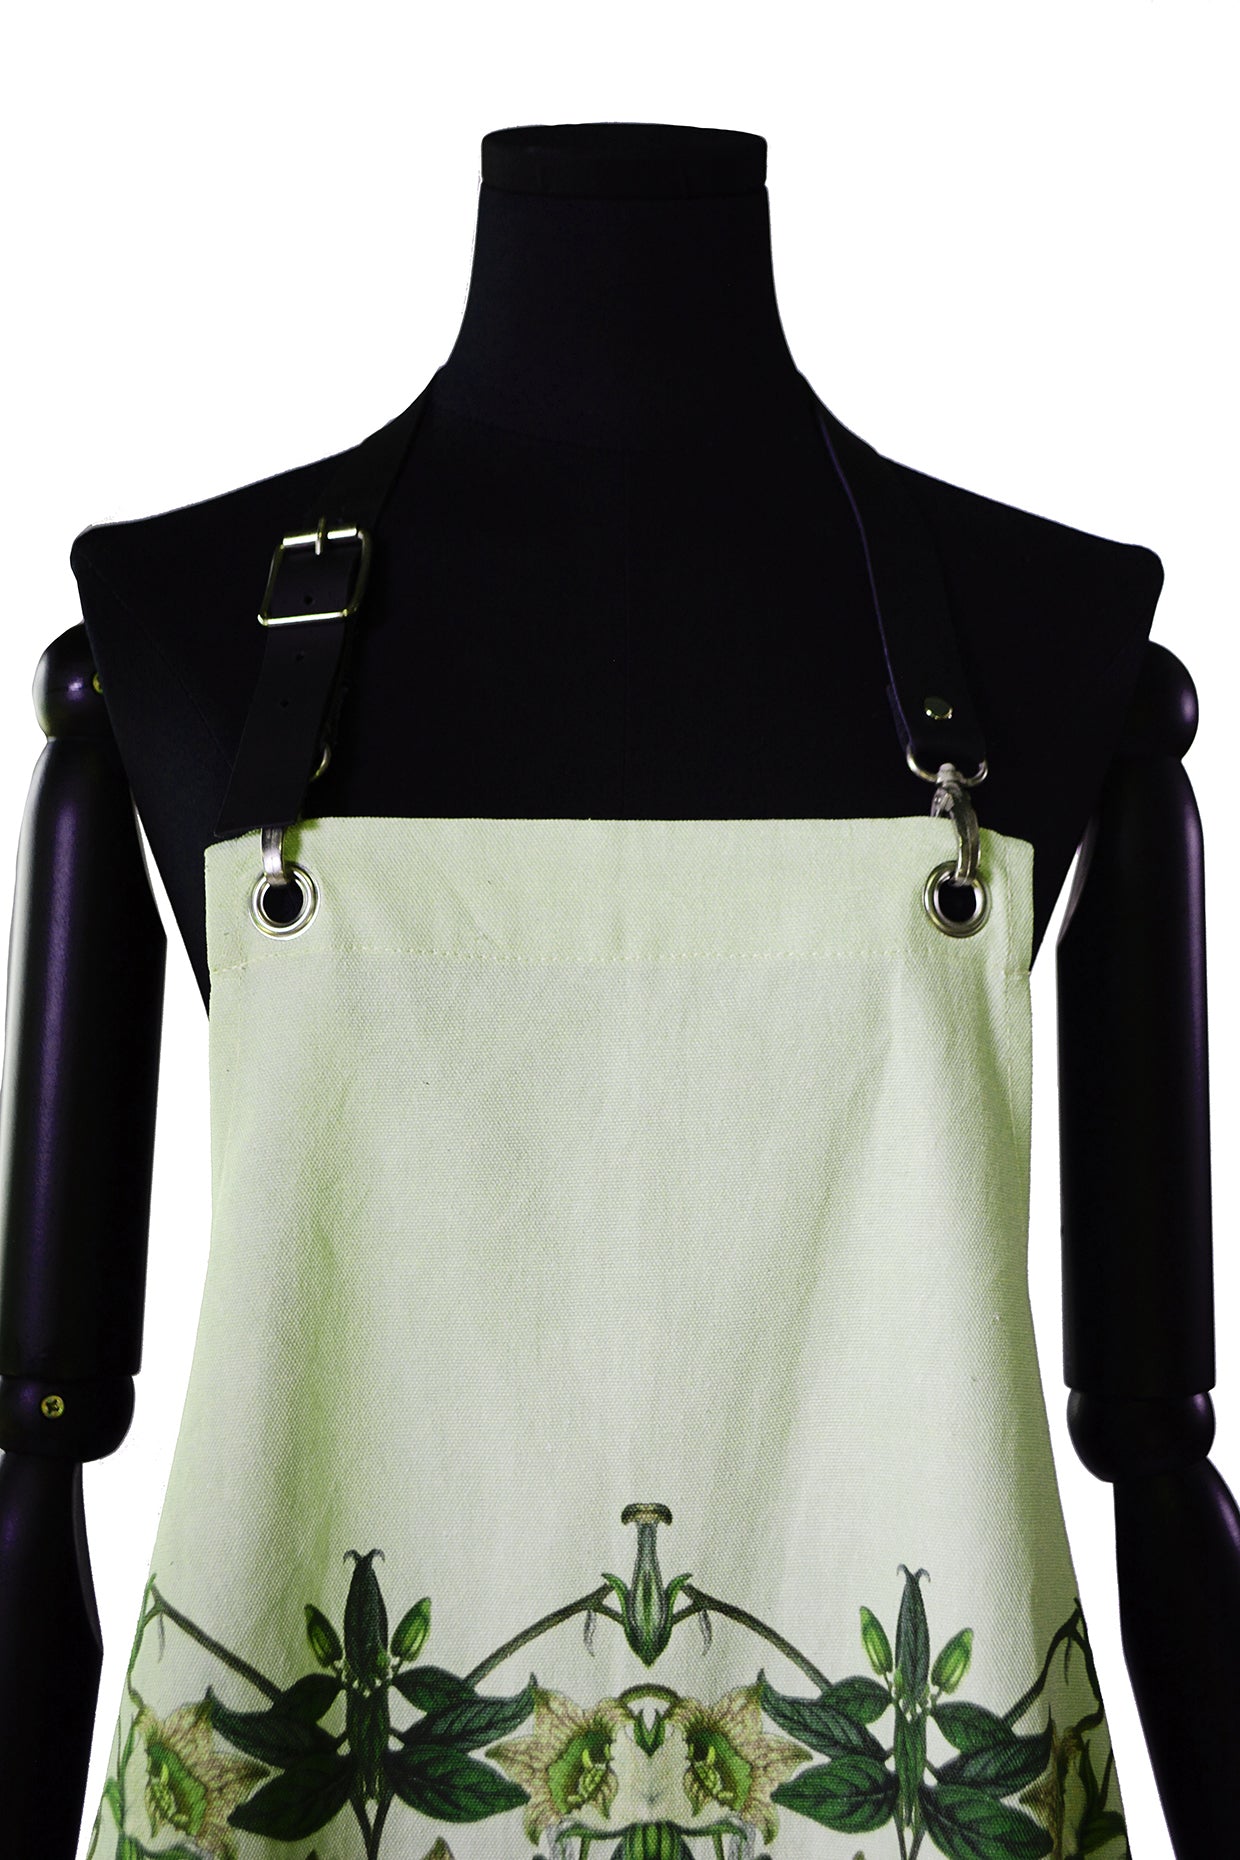 Apron with Leather Straps - Mint